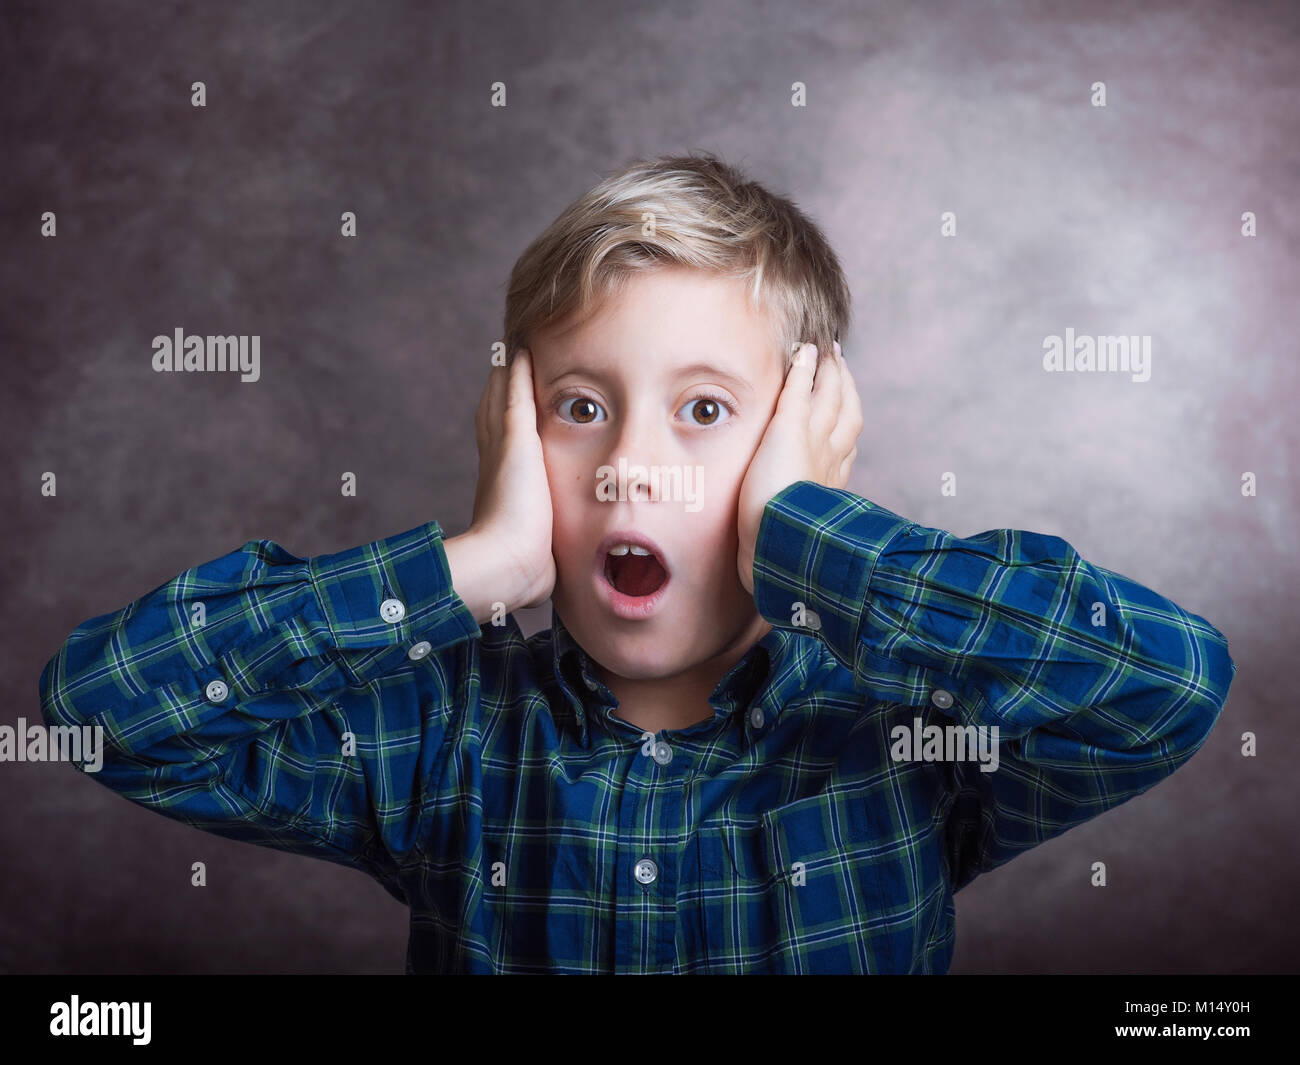 Young boy surprised. Stock Photo